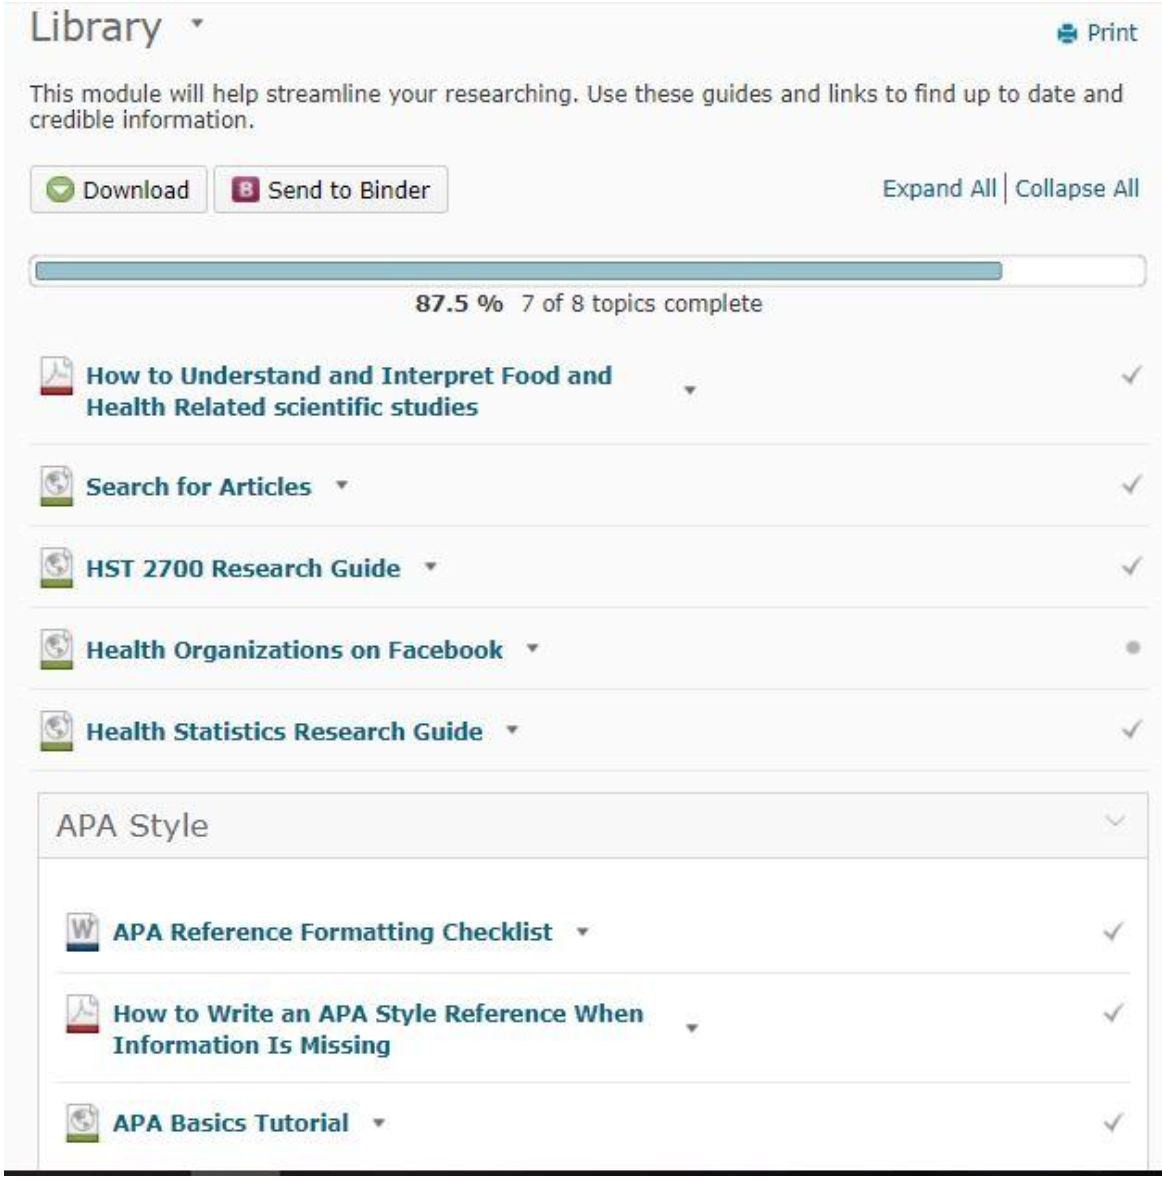 Library Module for HST 2700